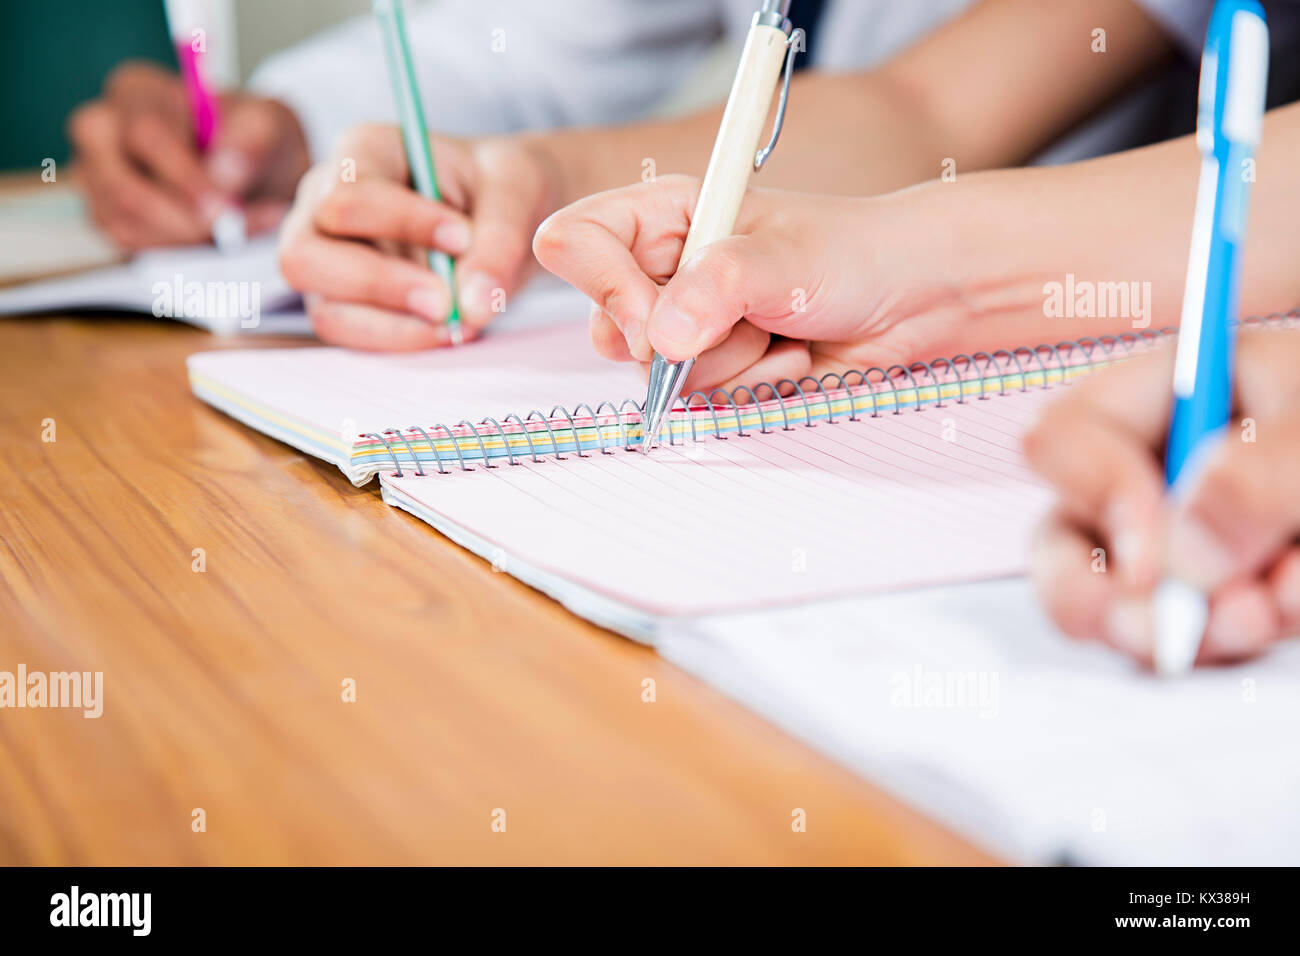 Close-Up High School Students Writing Notebook Study Education Learning Classroom Stock Photo